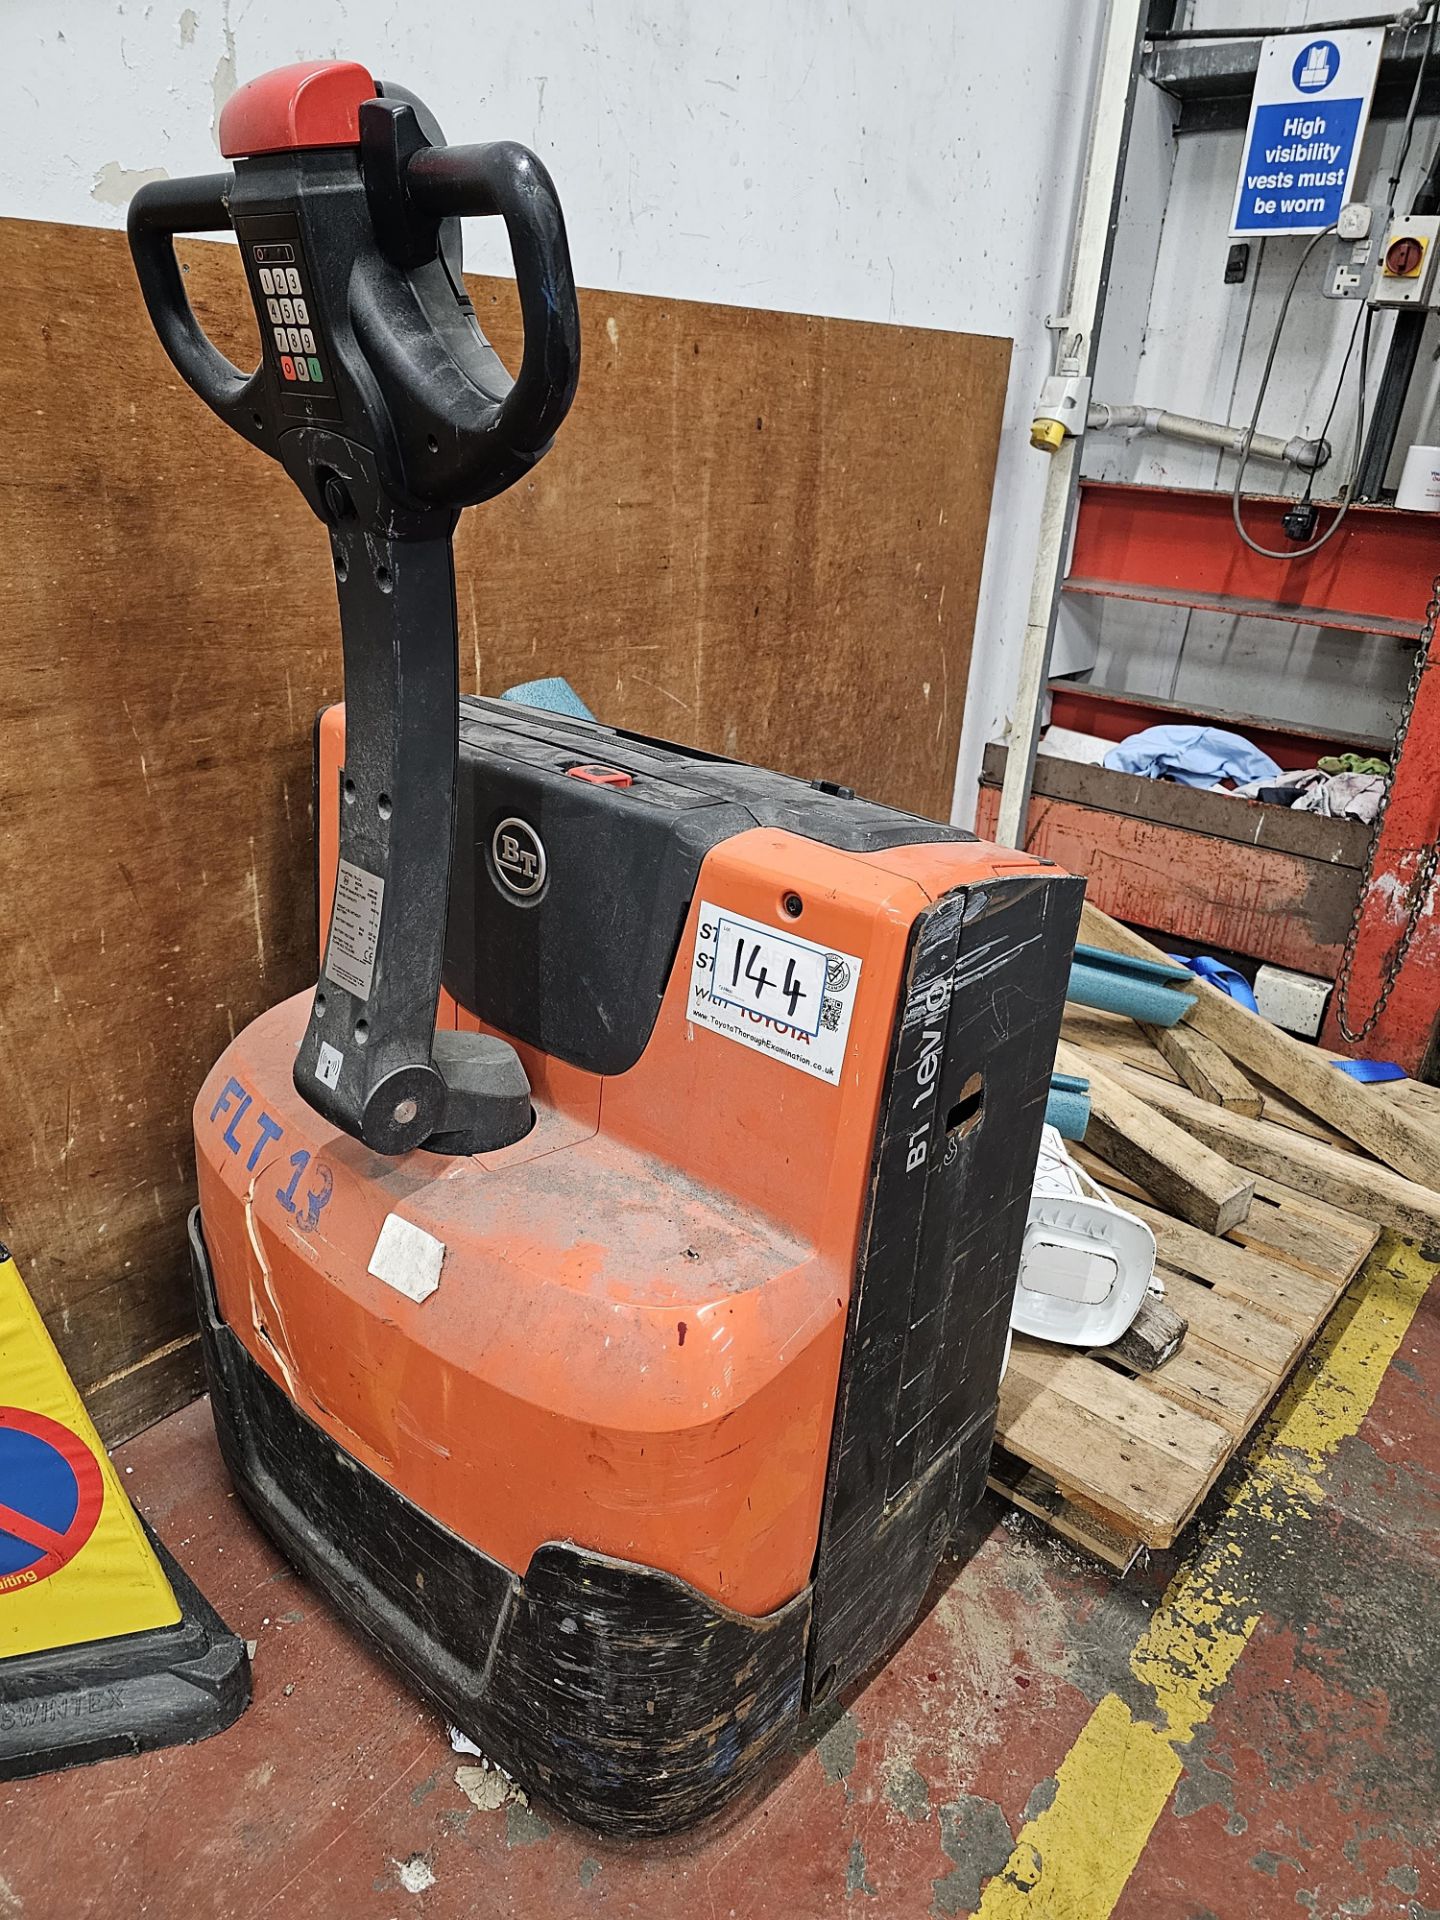 BT , LWE 180, Electric Pallet Truck (1800KG), Serial Number: 63955429, Year of Manufacture: 2015